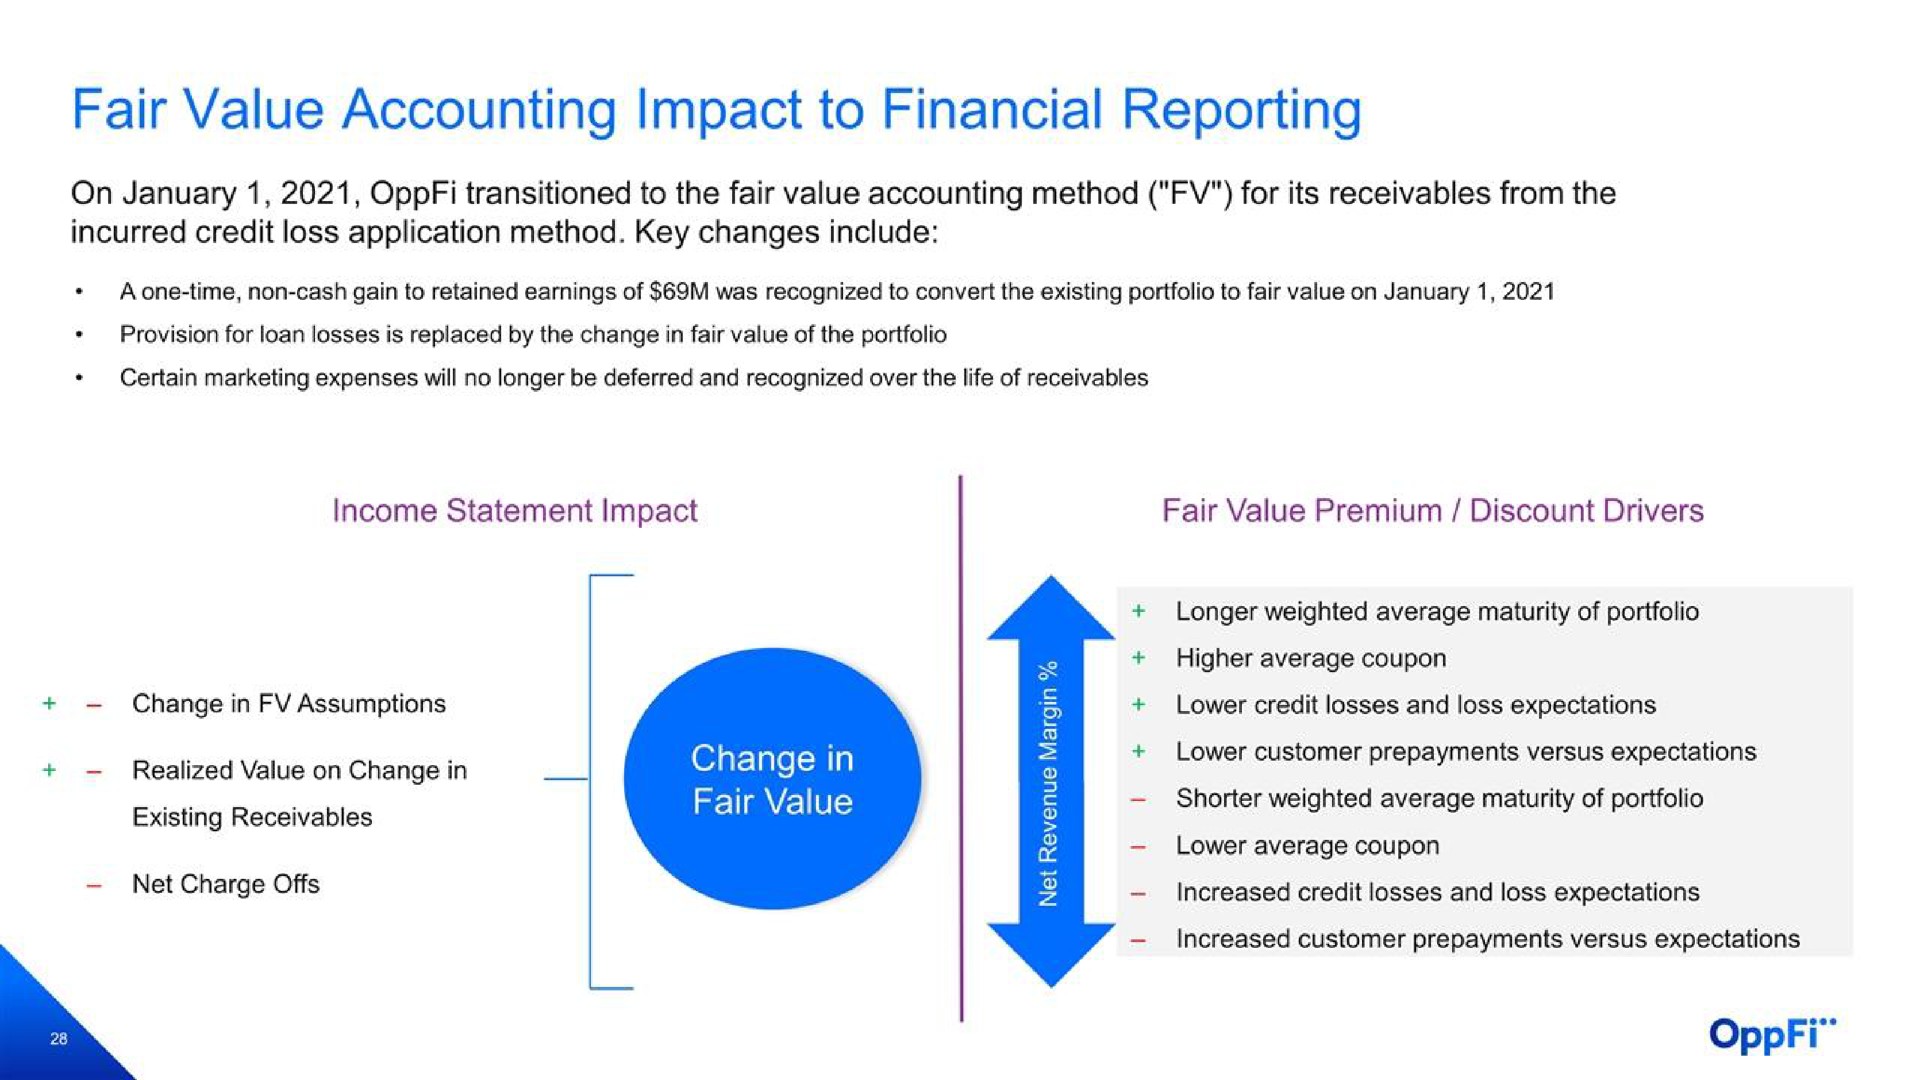 fair value accounting impact to financial reporting | OppFi